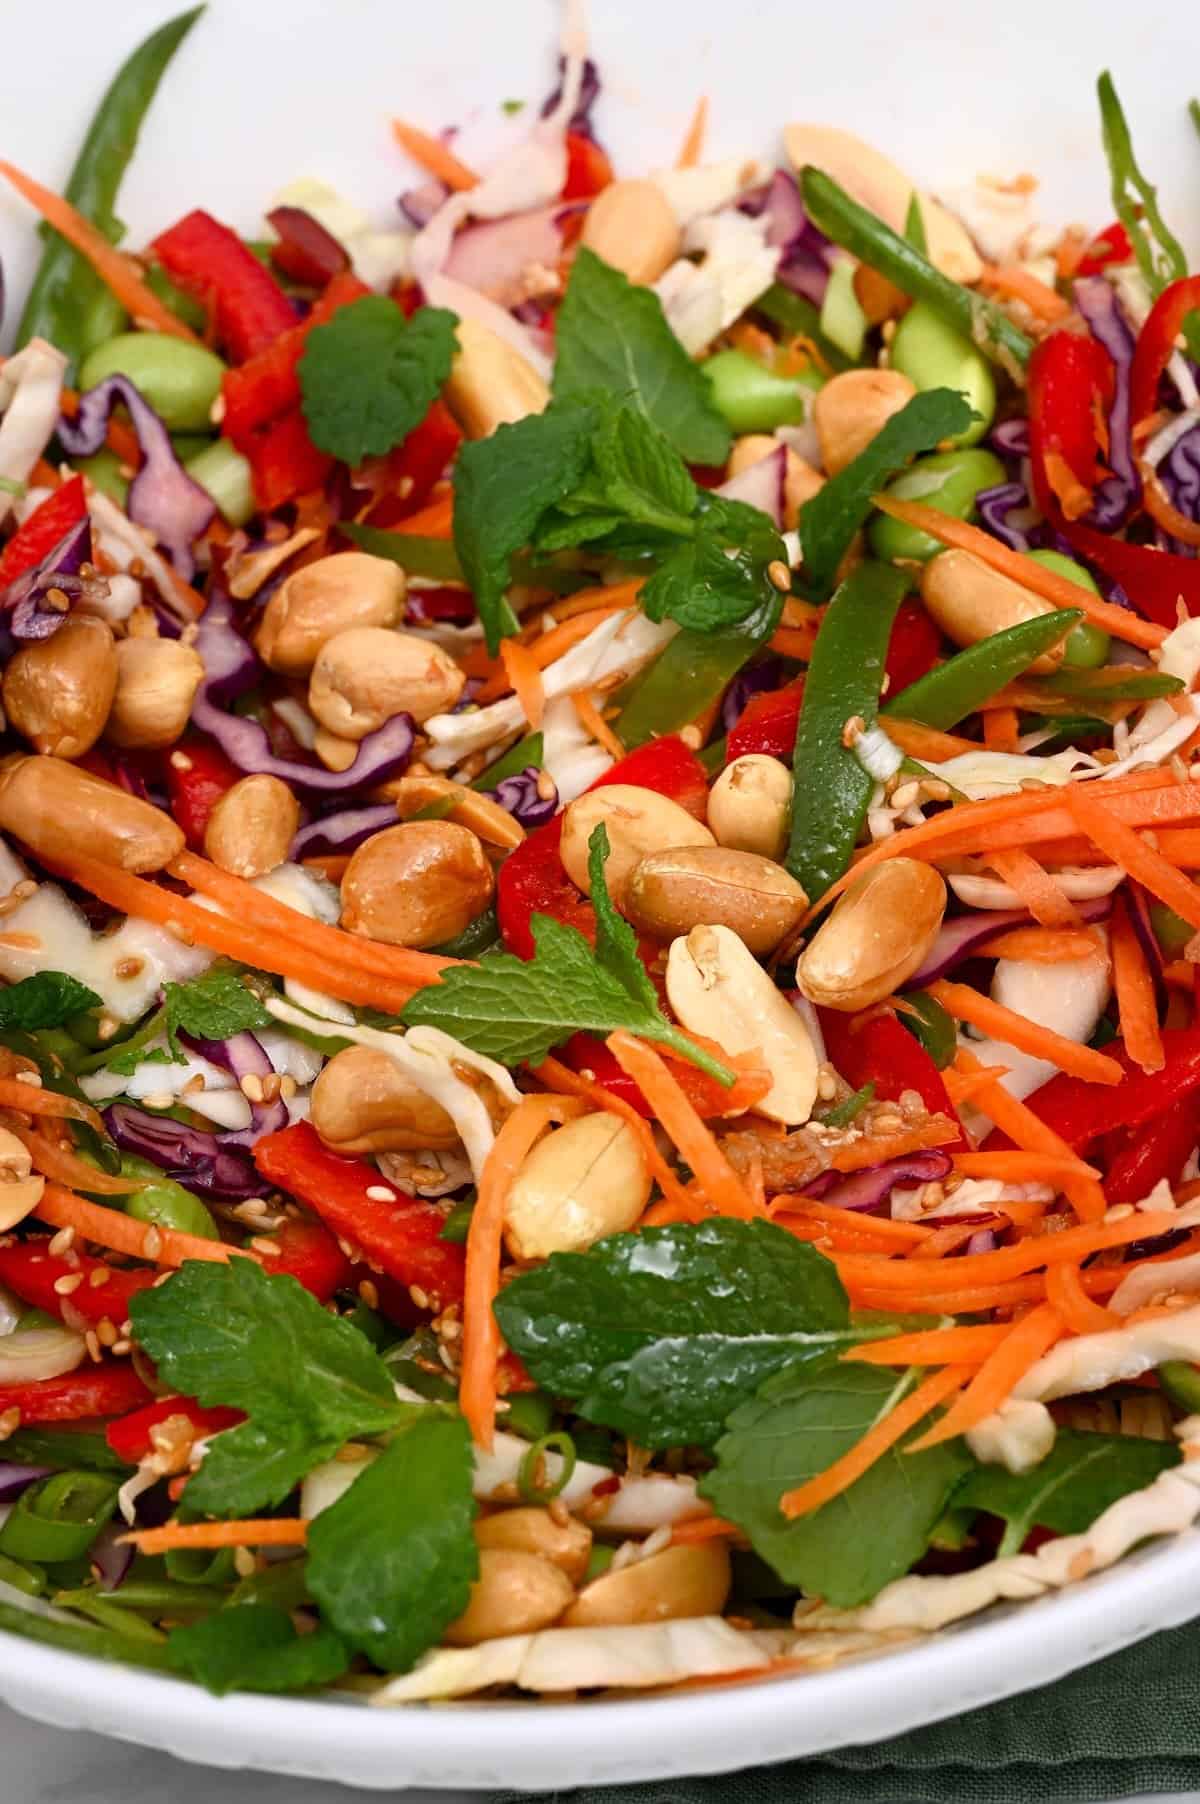 Asian salad with dressing